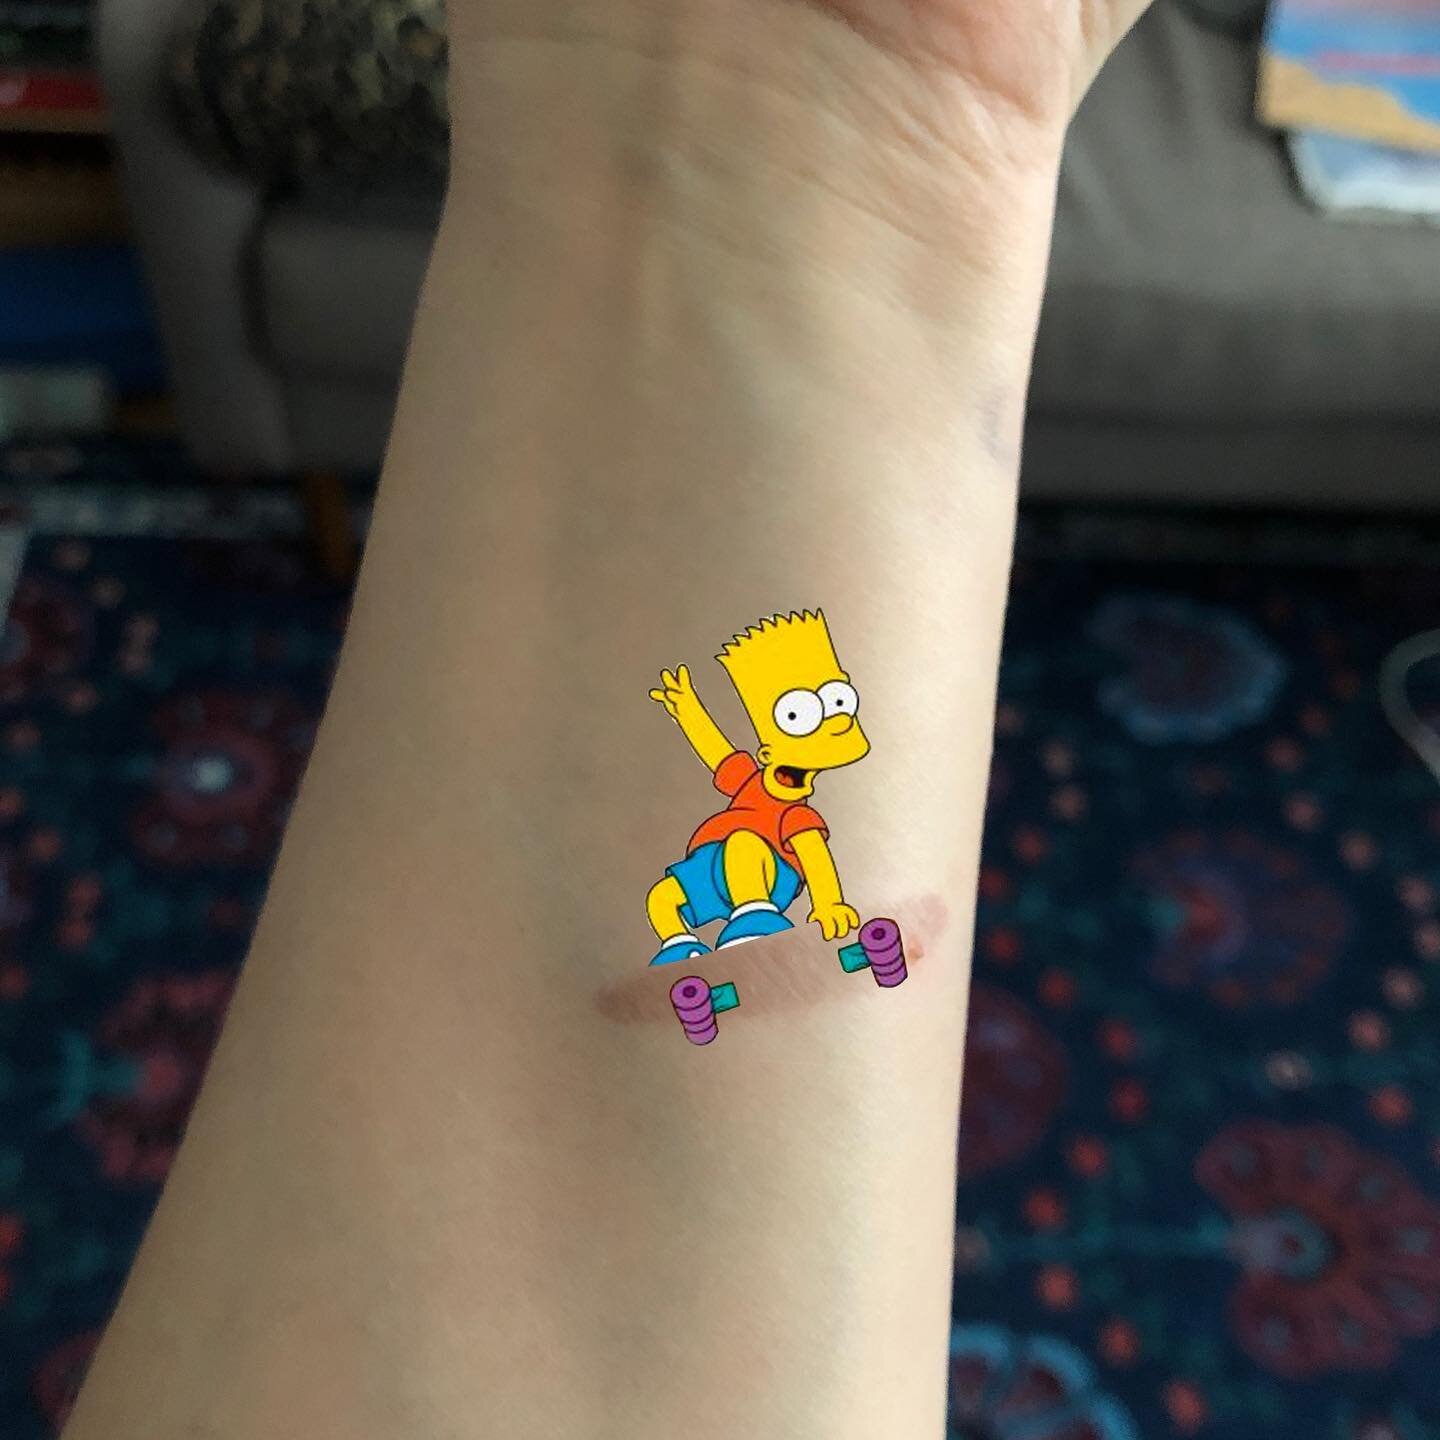 Burned my arm getting a frozen burrito out of the oven so I turned it into this cool new tattoo.